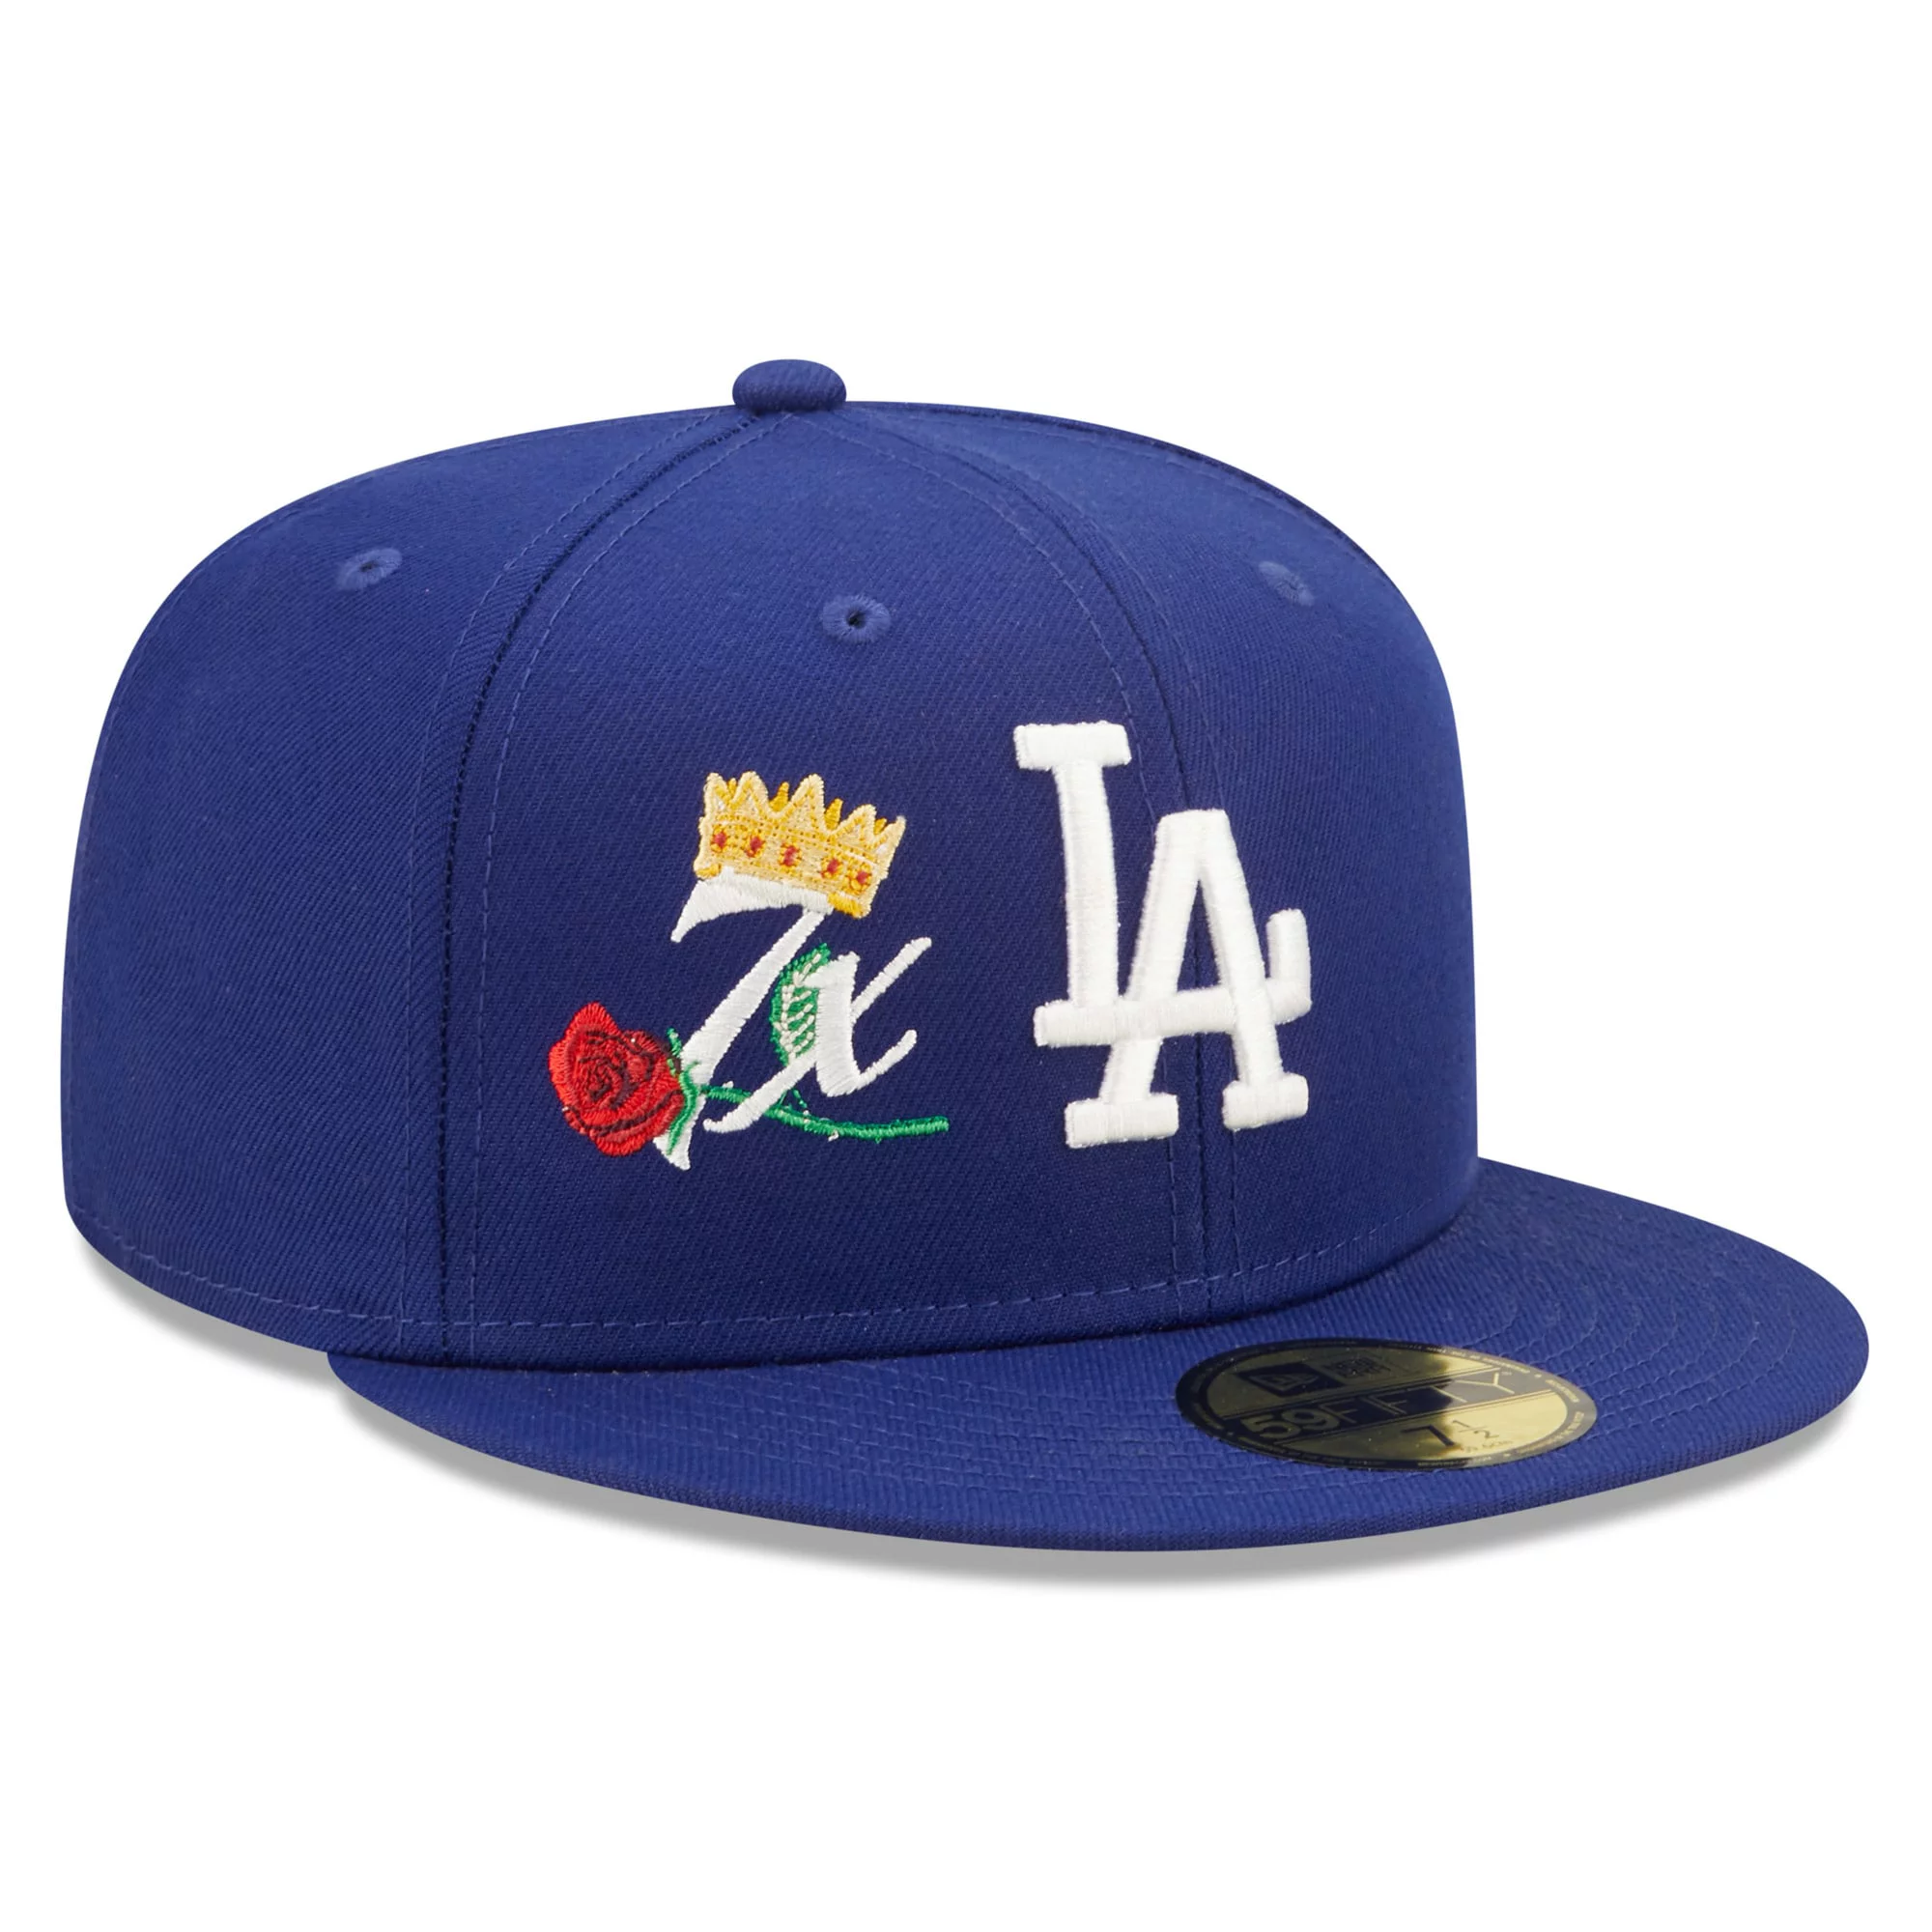 Men's New Era Royal Los Angeles Dodgers 7x World Series Champions Crown 59FIFTY Fitted Hat